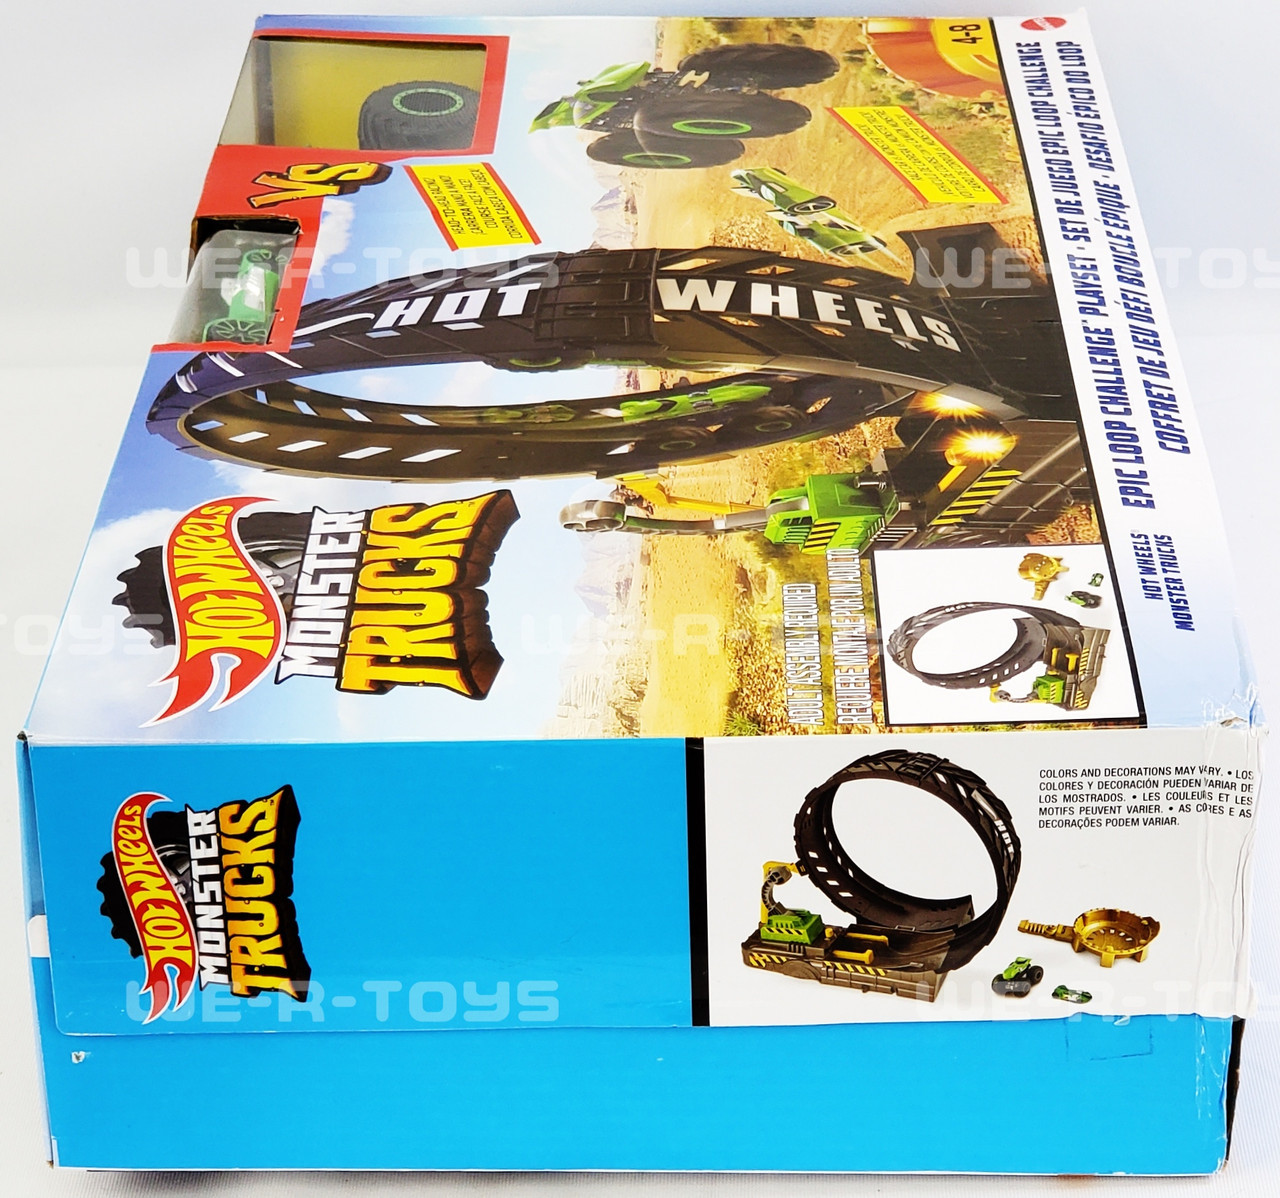 Hot Wheels Monster Truck Epic Loop Challenge Play Set with Truck and C –  Square Imports